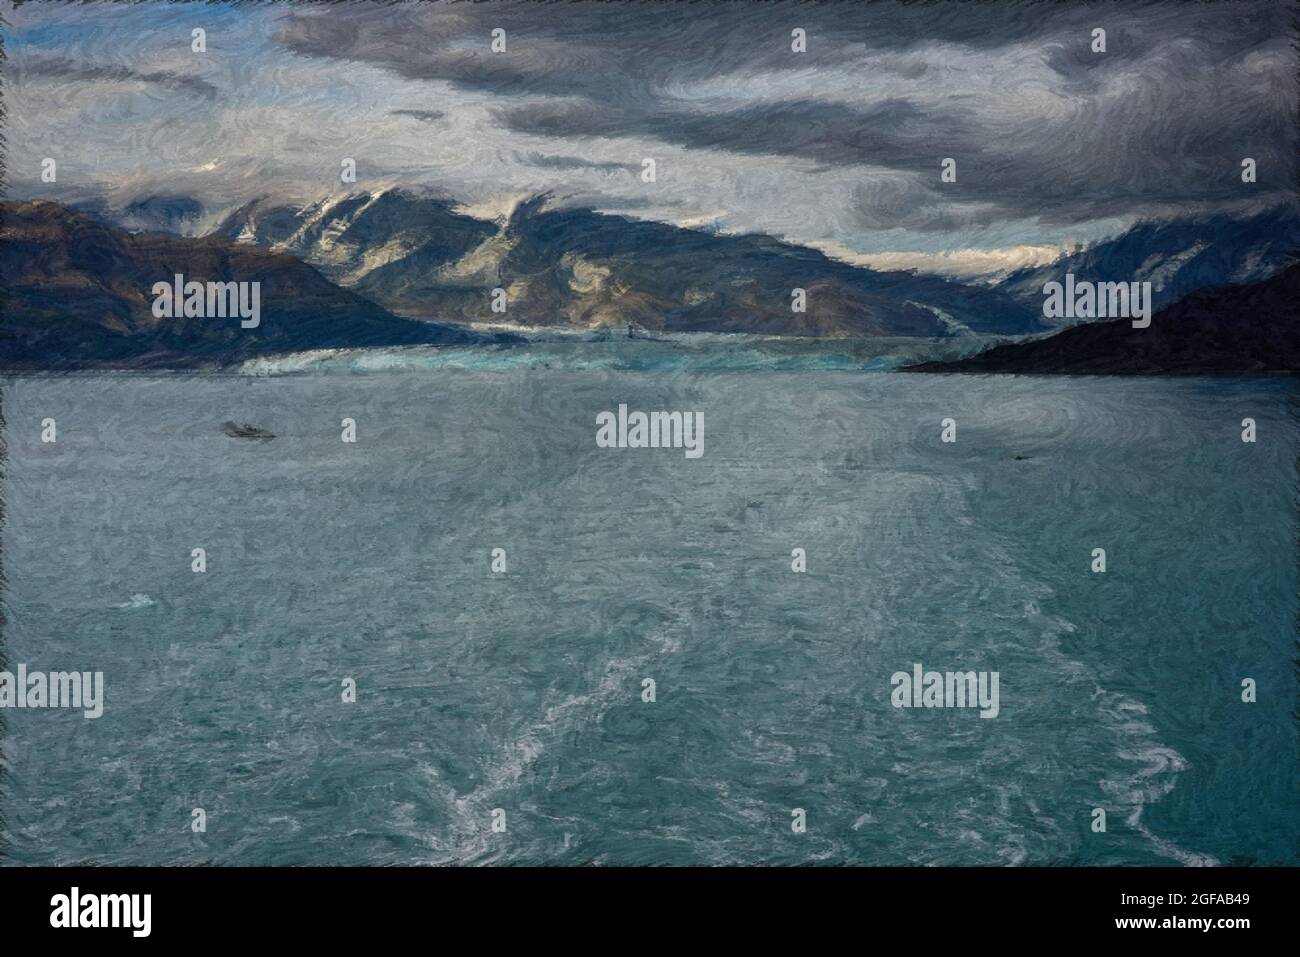 An illustration of the wake of a cruise ship sailing away from Hubbard Glacier with a view of the glacier and mountains. Stock Photo